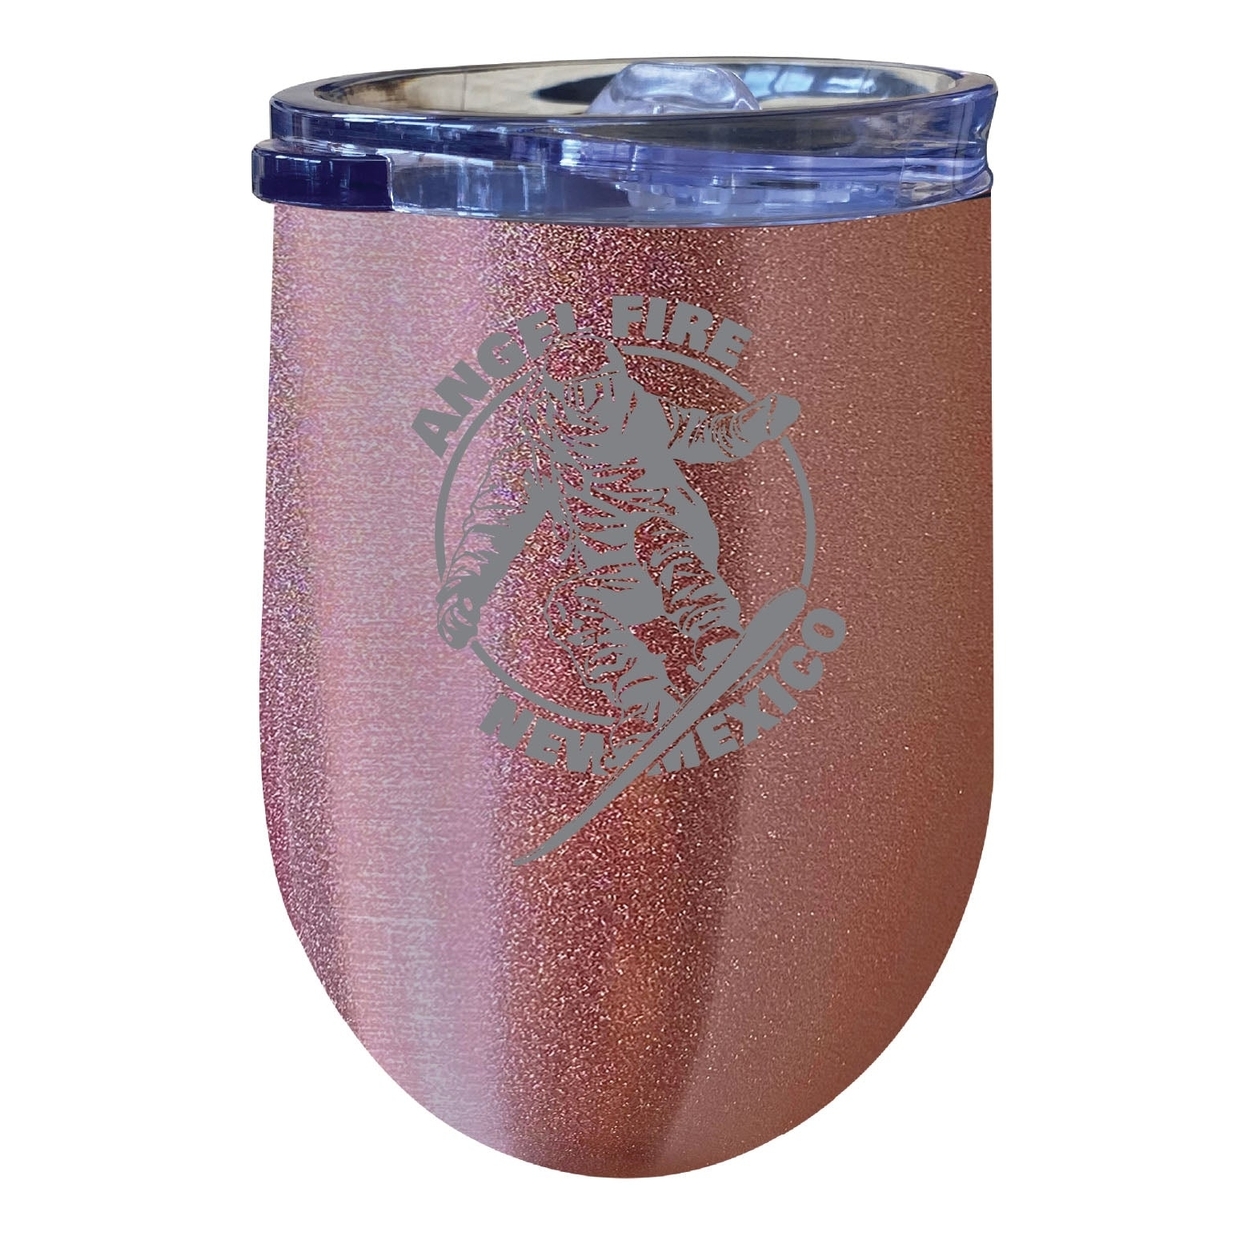 Angel Fire New Mexico Souvenir 12 Oz Engraved Insulated Wine Stainless Steel Tumbler - Rose Gold,,4-Pack